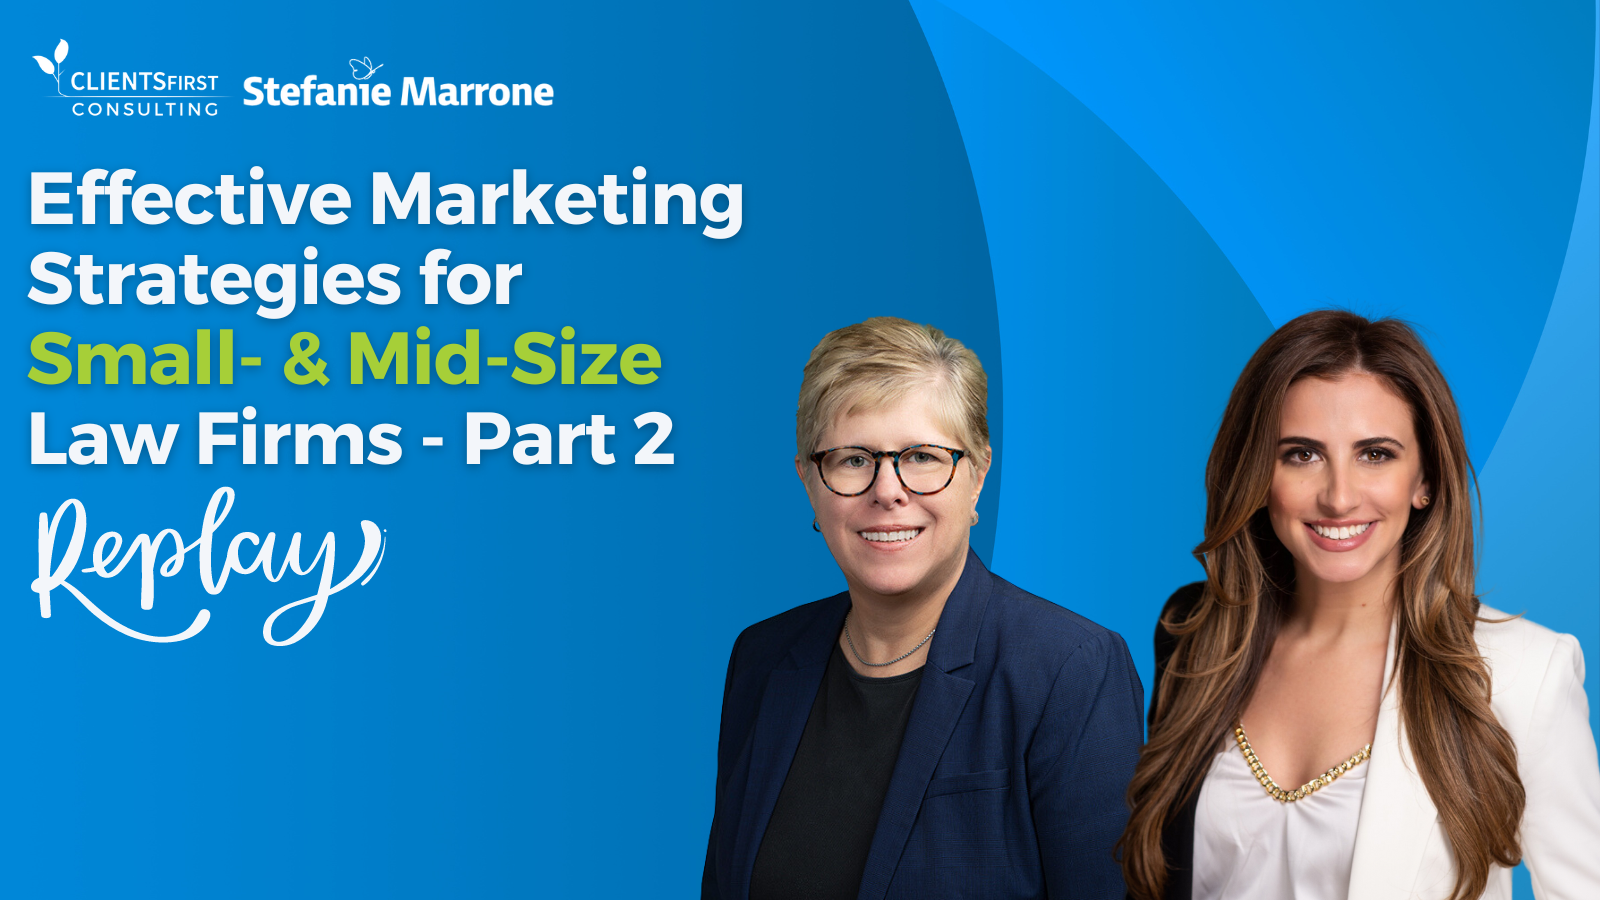 Strategic Marketing Insights For Small- And Mid-Size Law Firms: Highlights From Our Latest Webinar